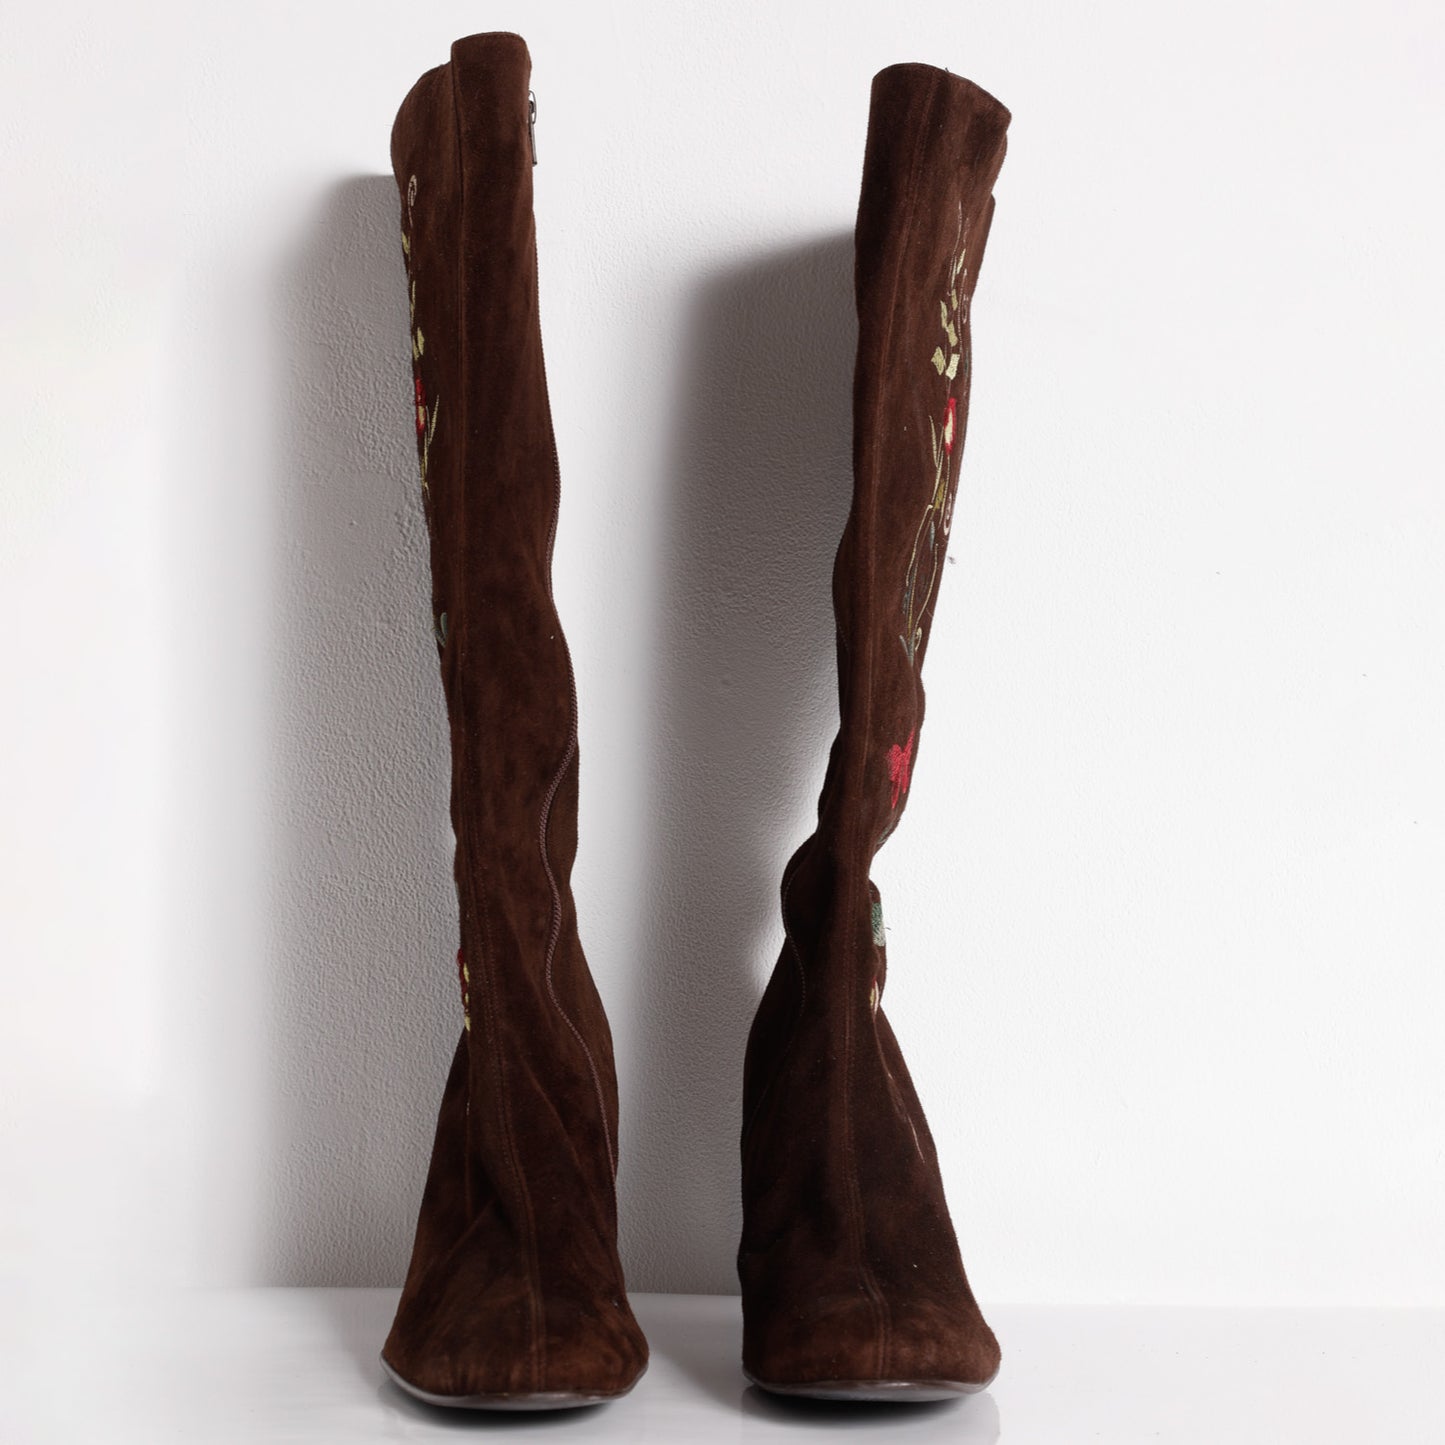 OFFICE LONDON Brown Suede with Multicolor Floral Embroidery Knee High Boot Heels